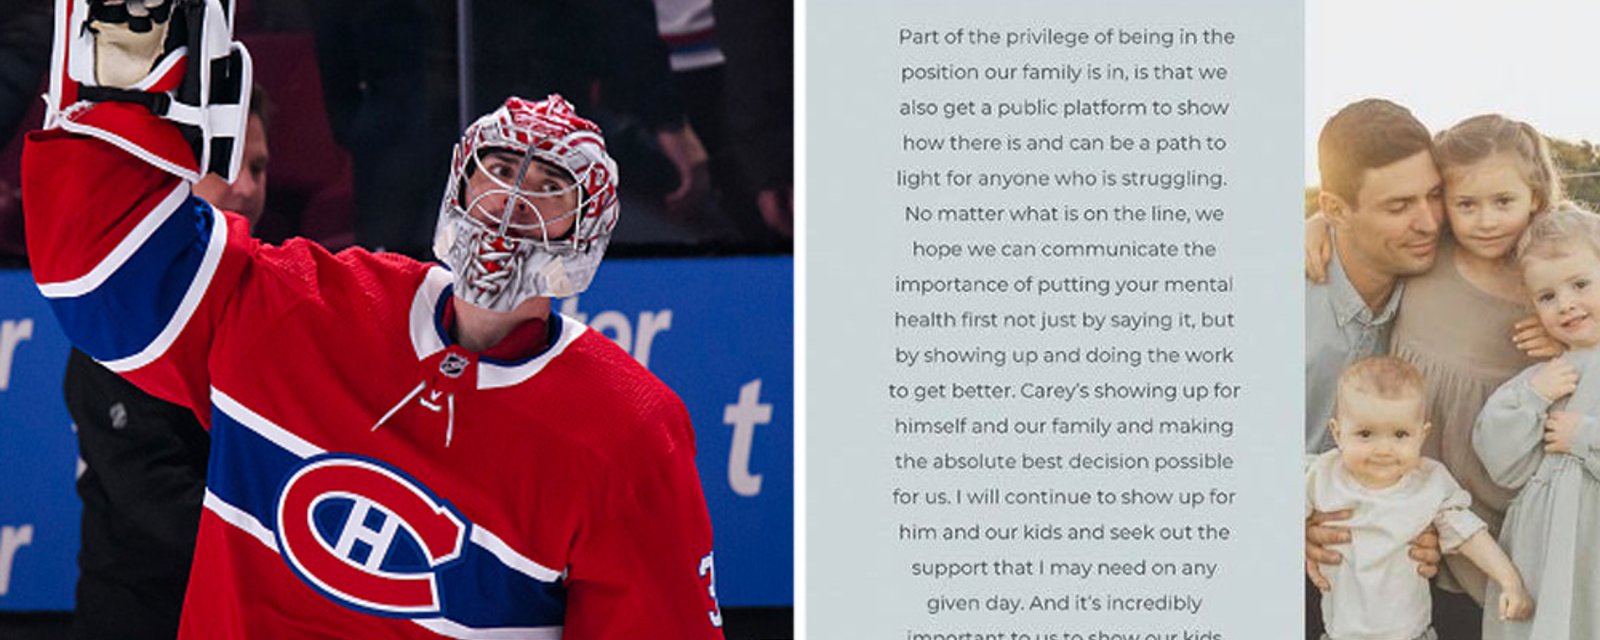 Angela Price shares details after husband Carey Price leaves the Montreal Canadiens